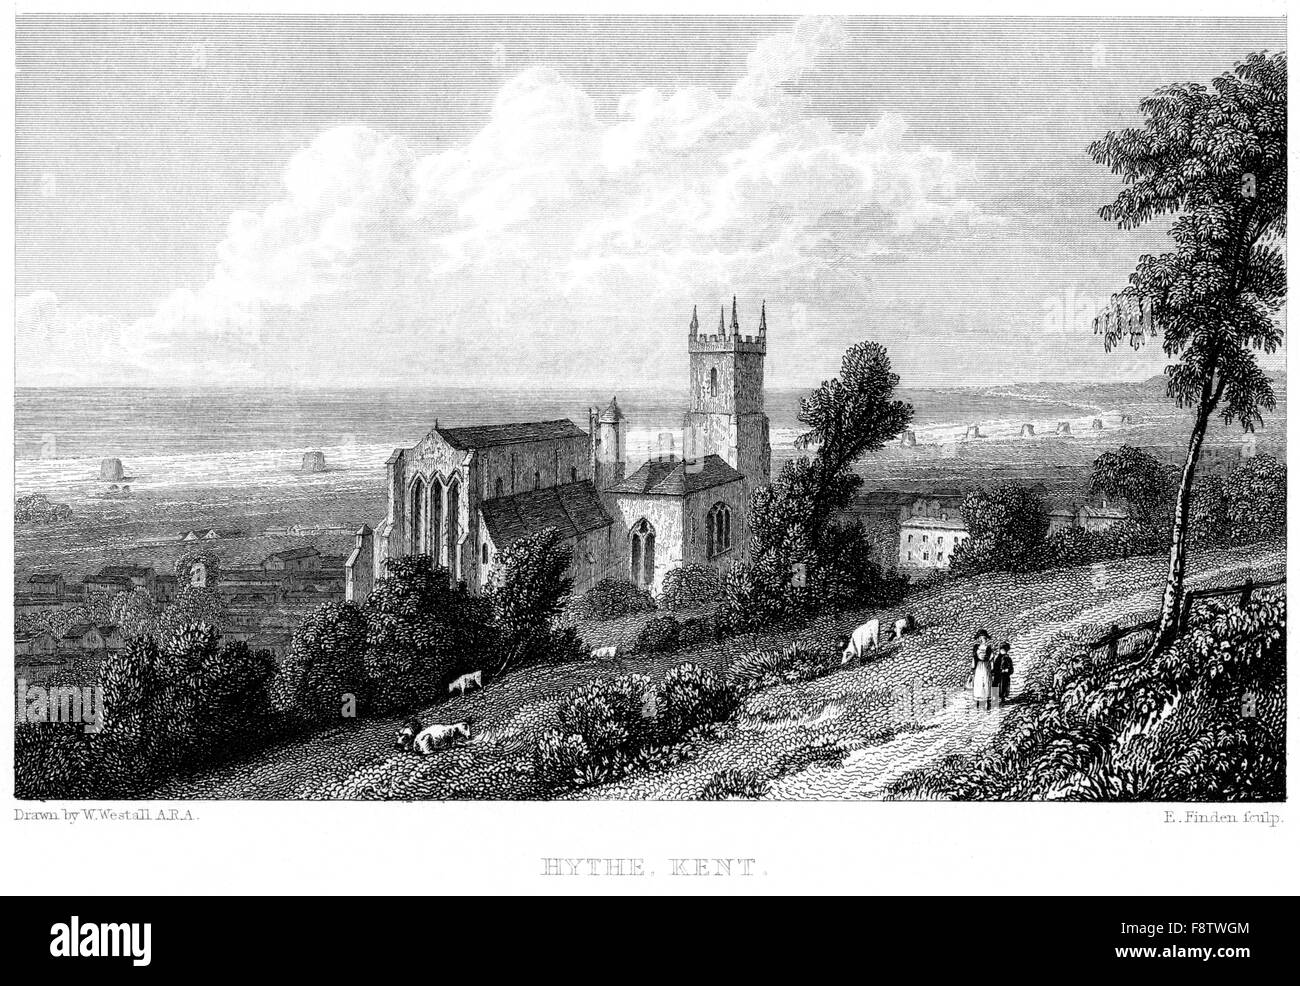 An engraving of Hythe, Kent scanned at high resolution from a book printed in 1834. Believed copyright free. Stock Photo